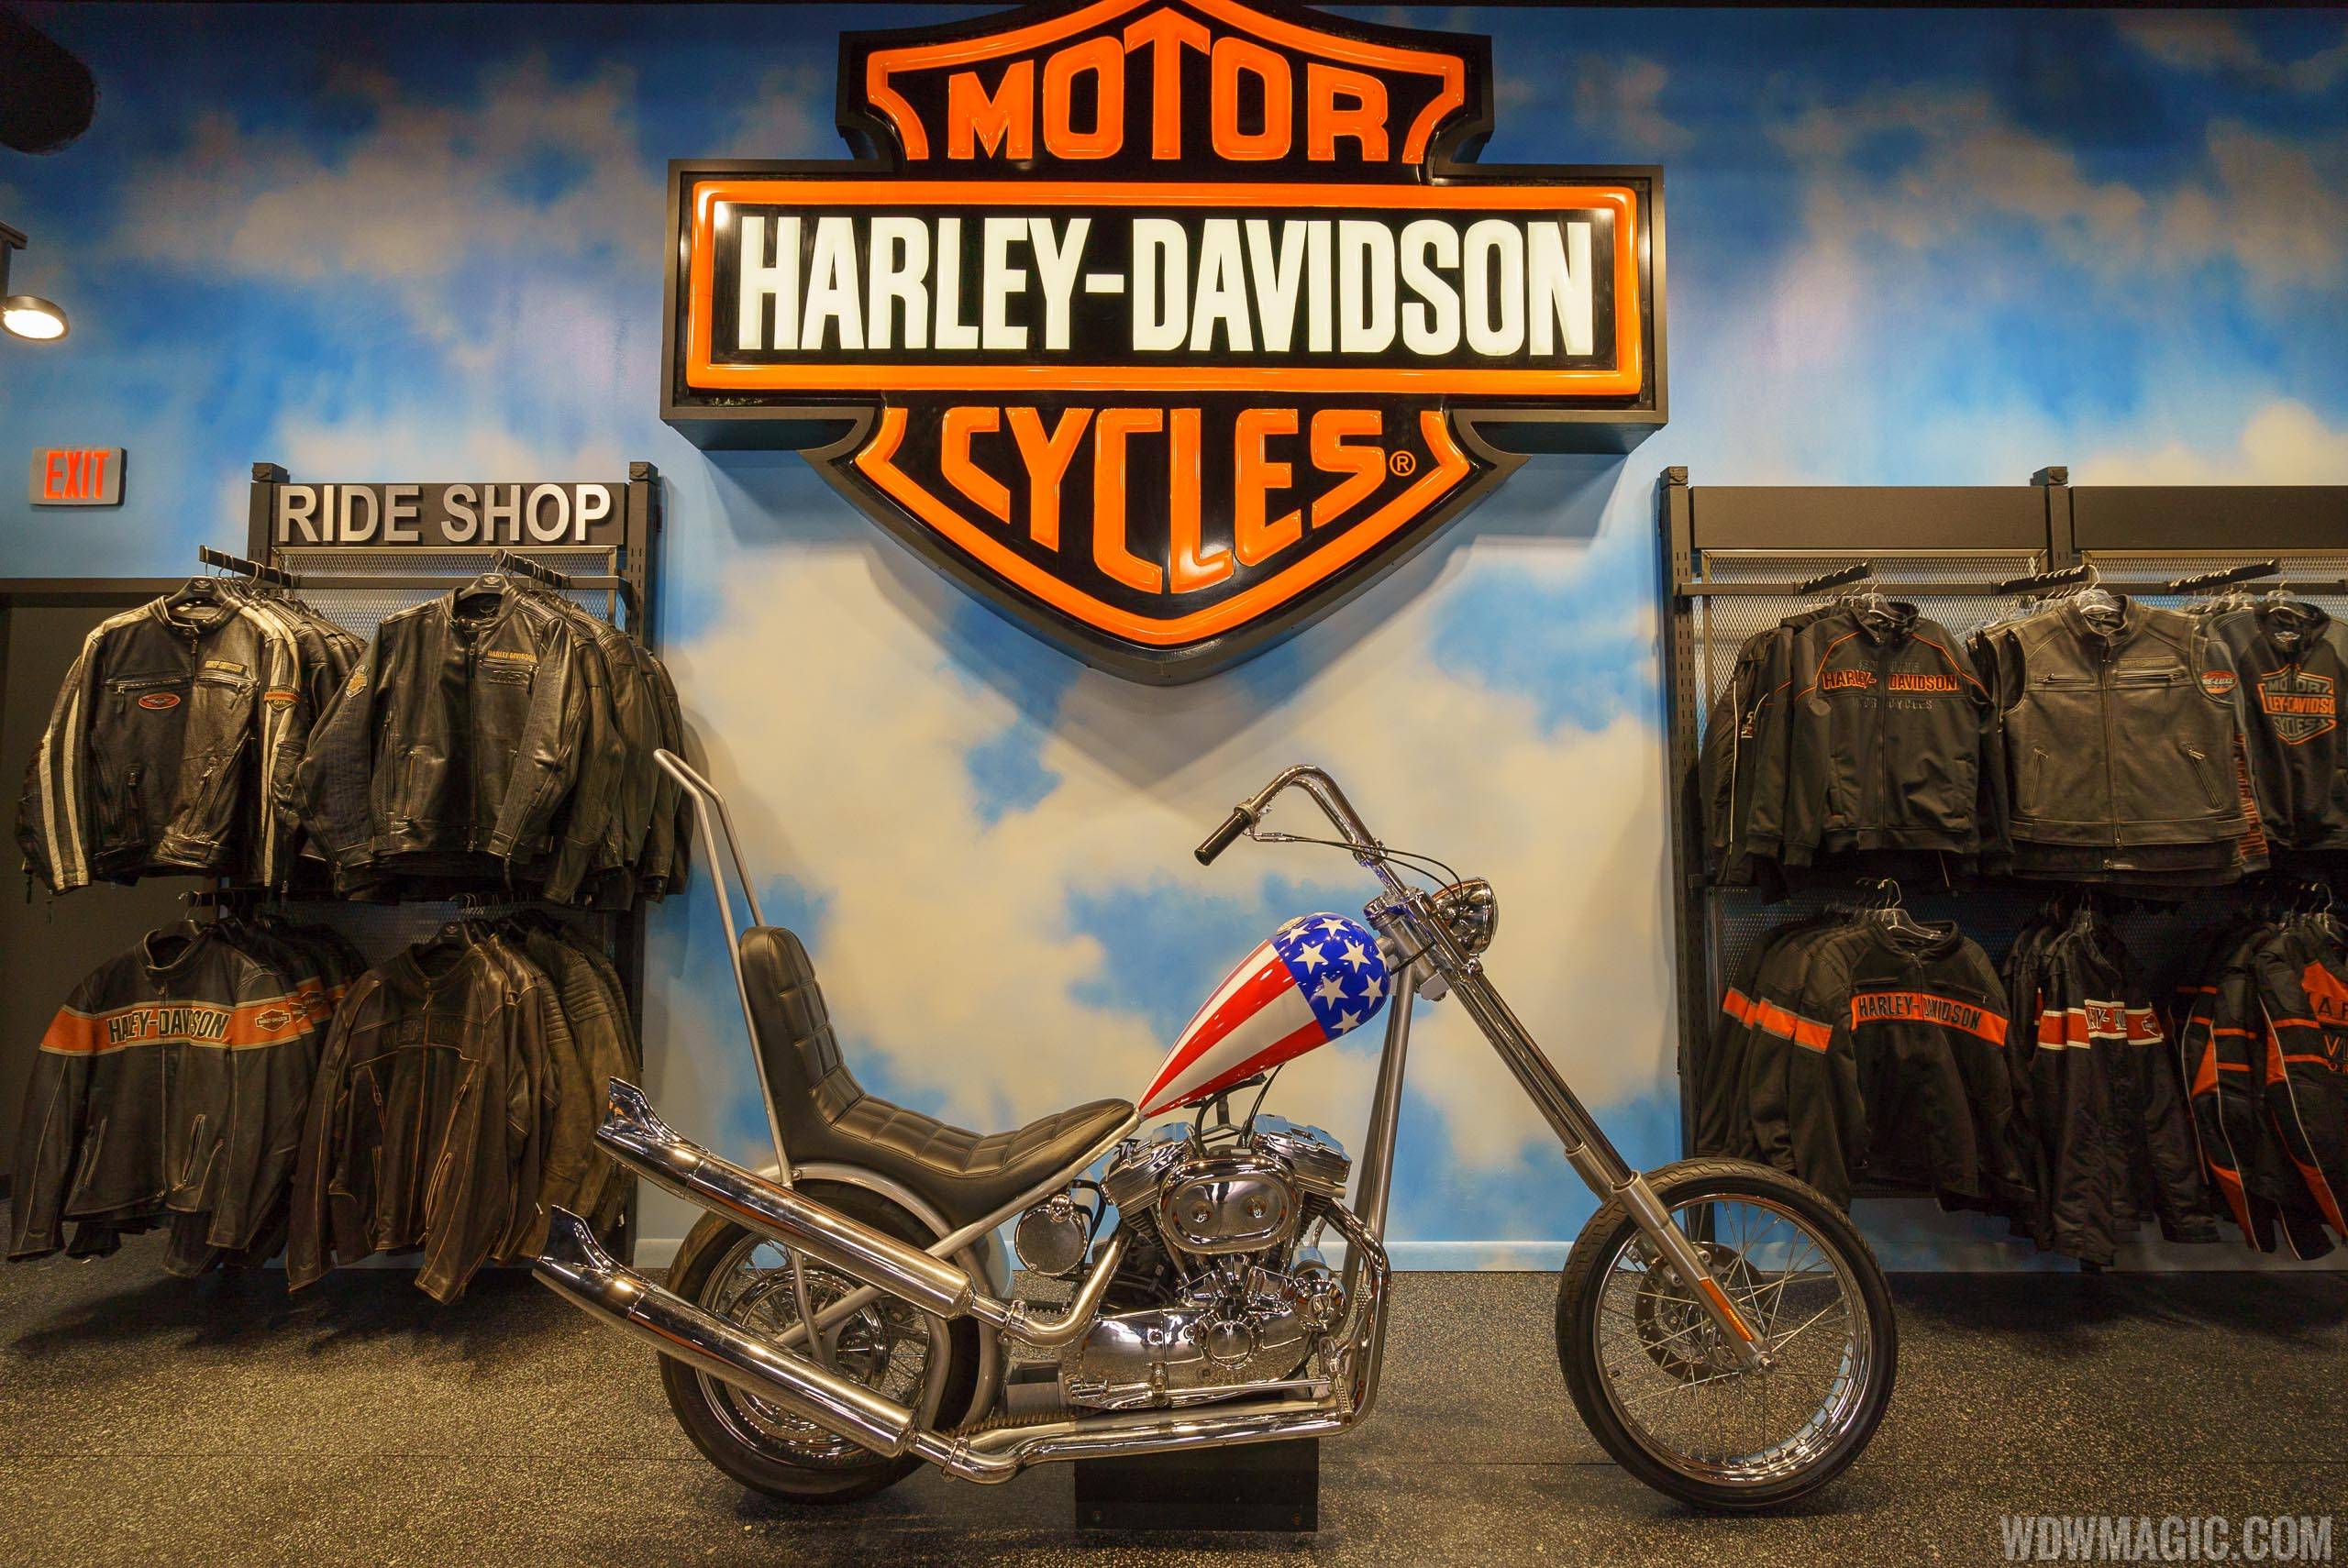 Harley-Davidson Motor Cycles in the Town Center